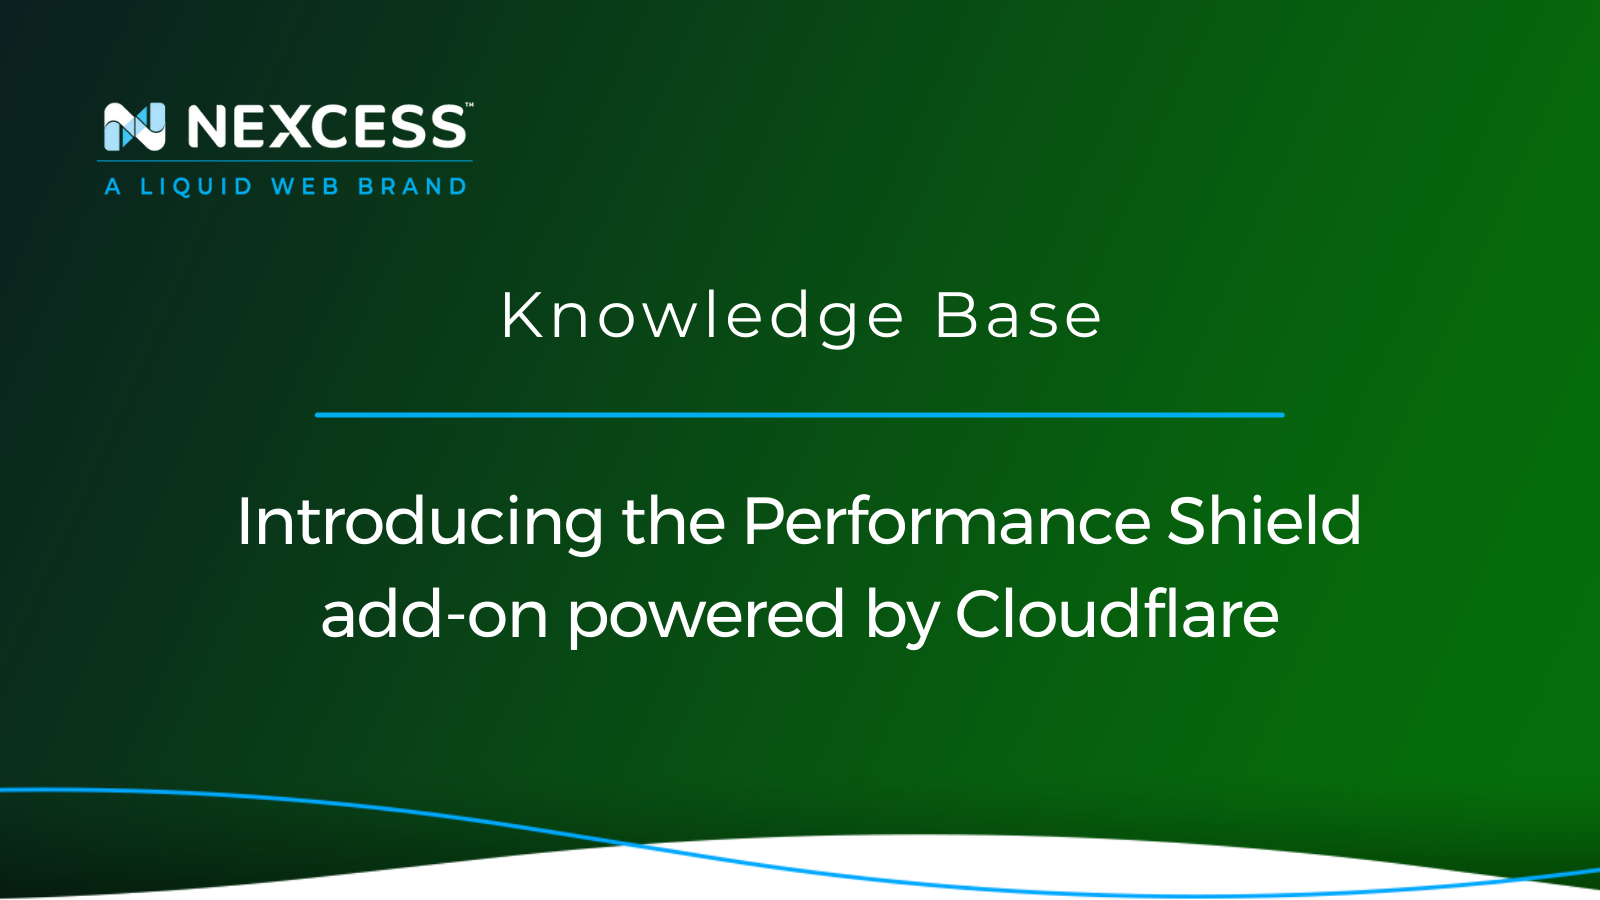 Introducing the Performance Shield add-on powered by Cloudflare